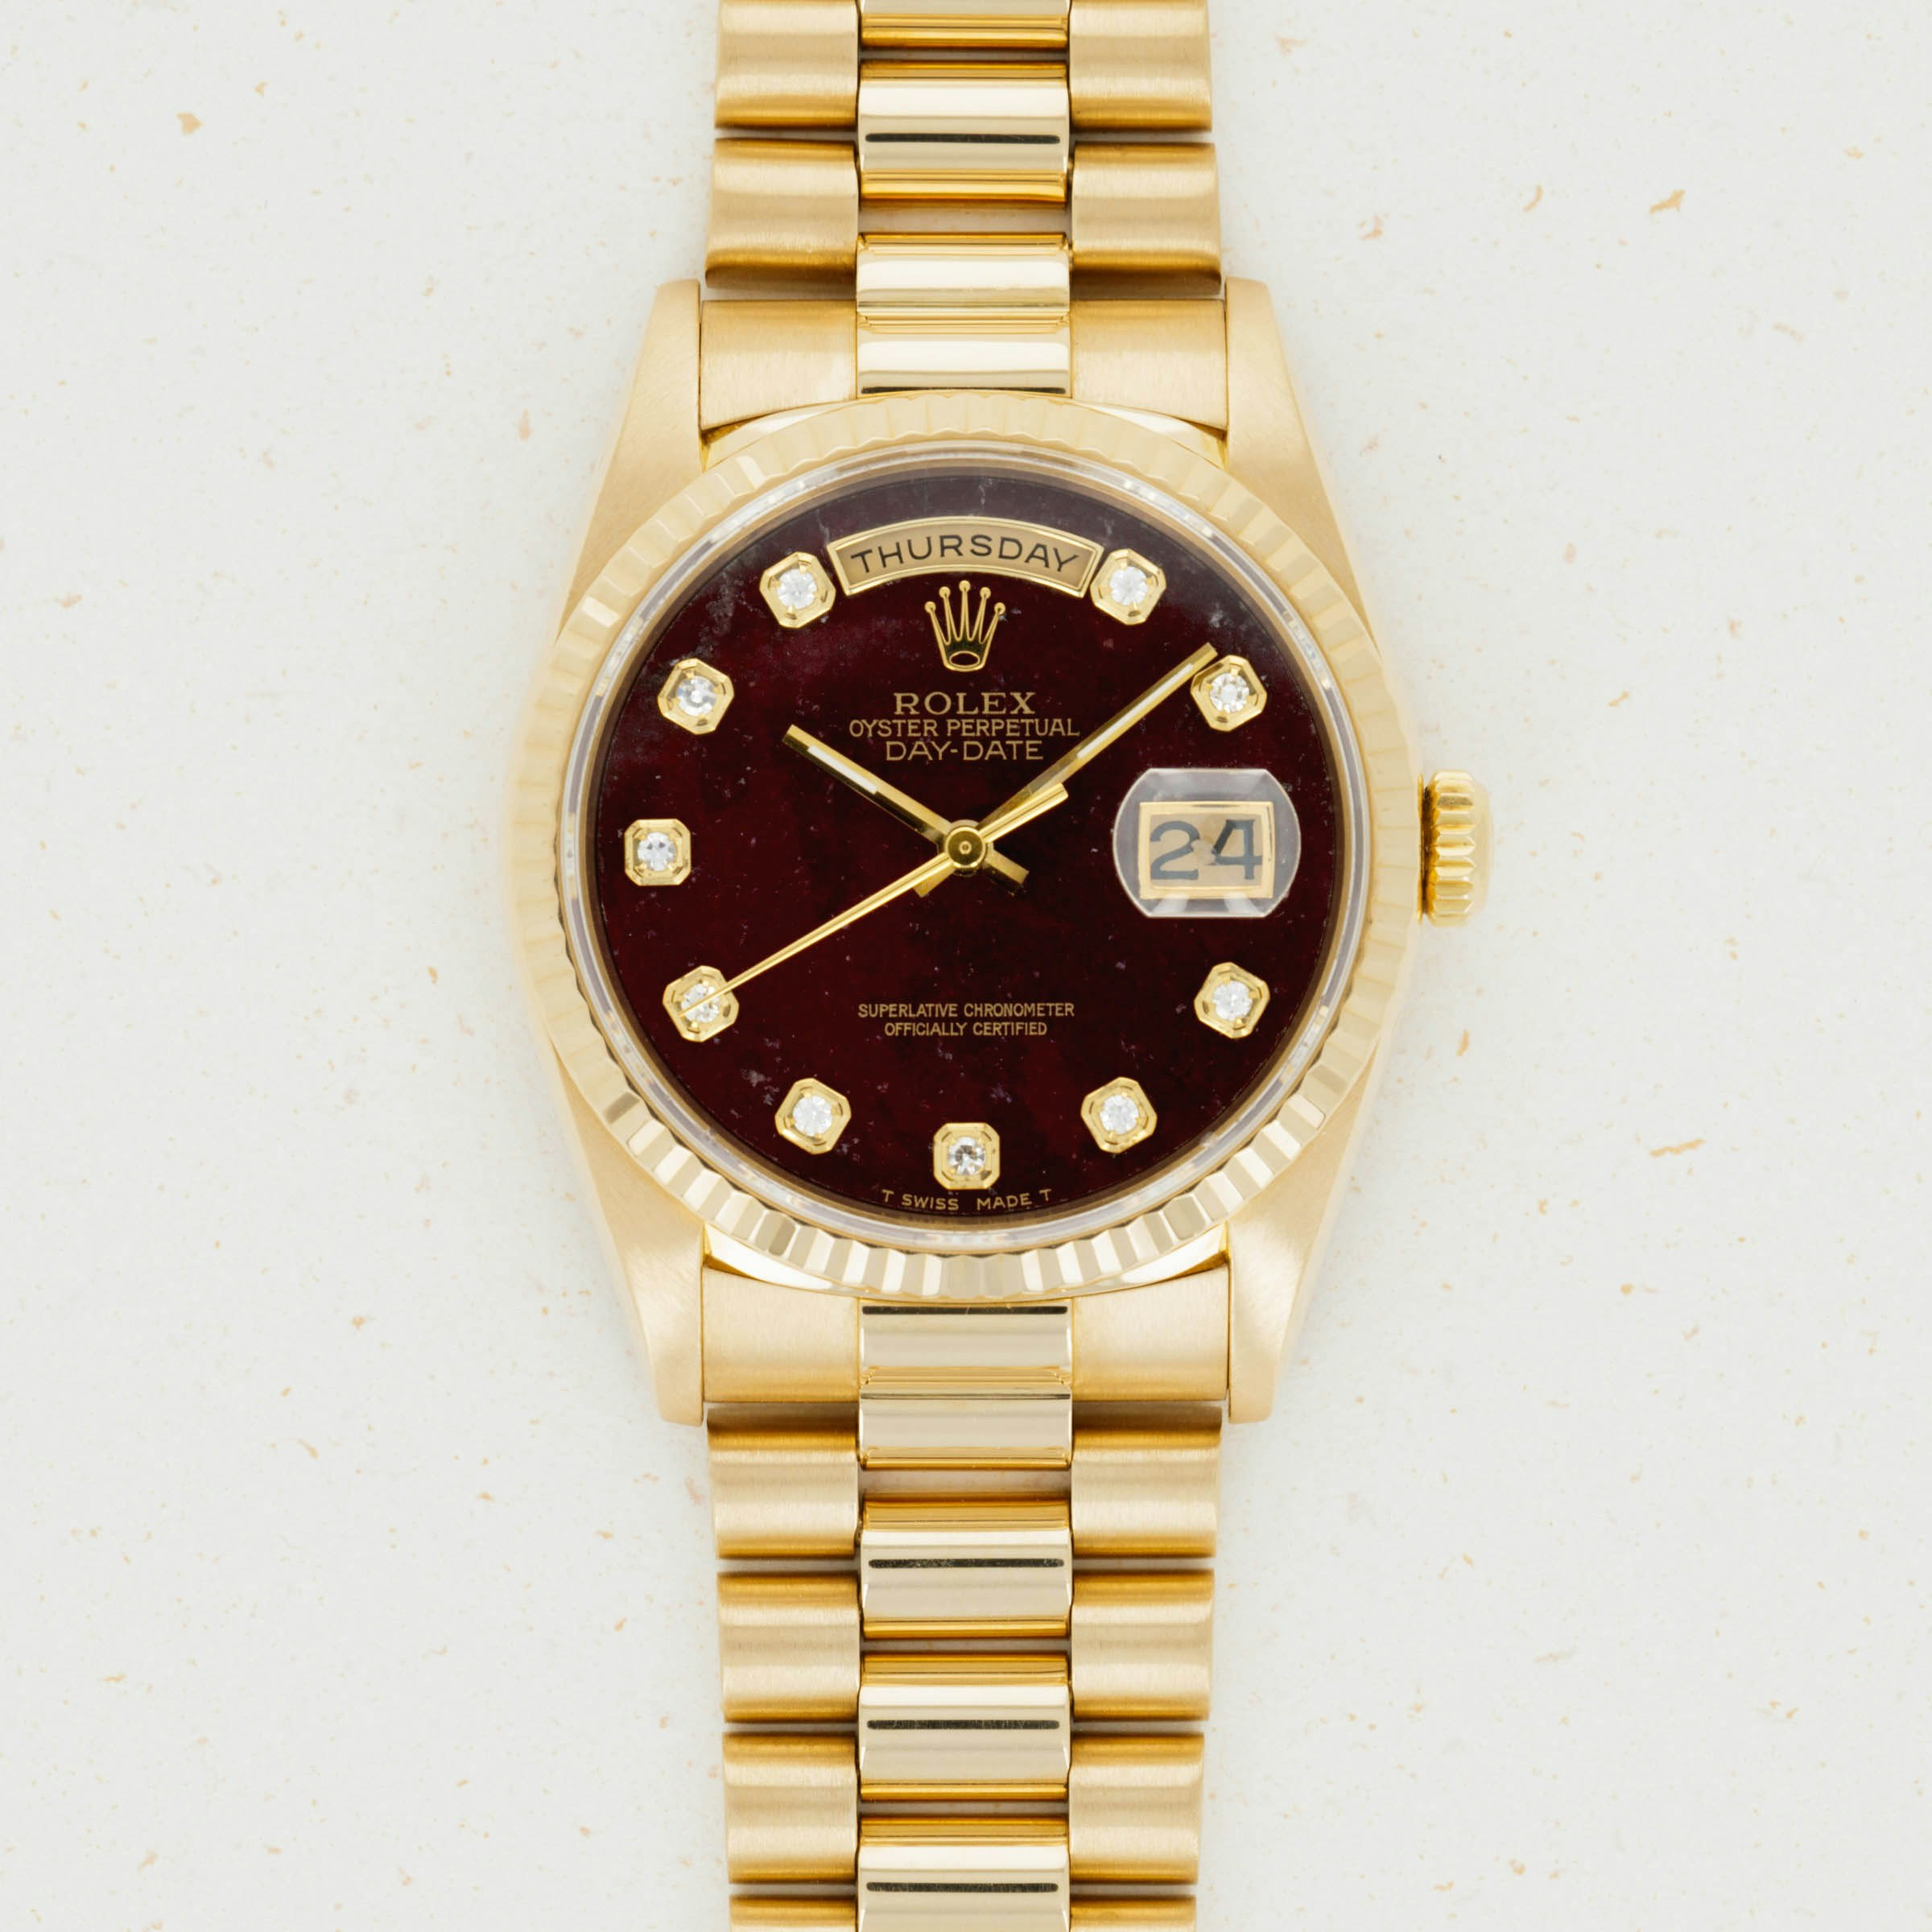 Thumbnail for Rolex Day-Date 18238 Yellow Gold Rubelite Dial